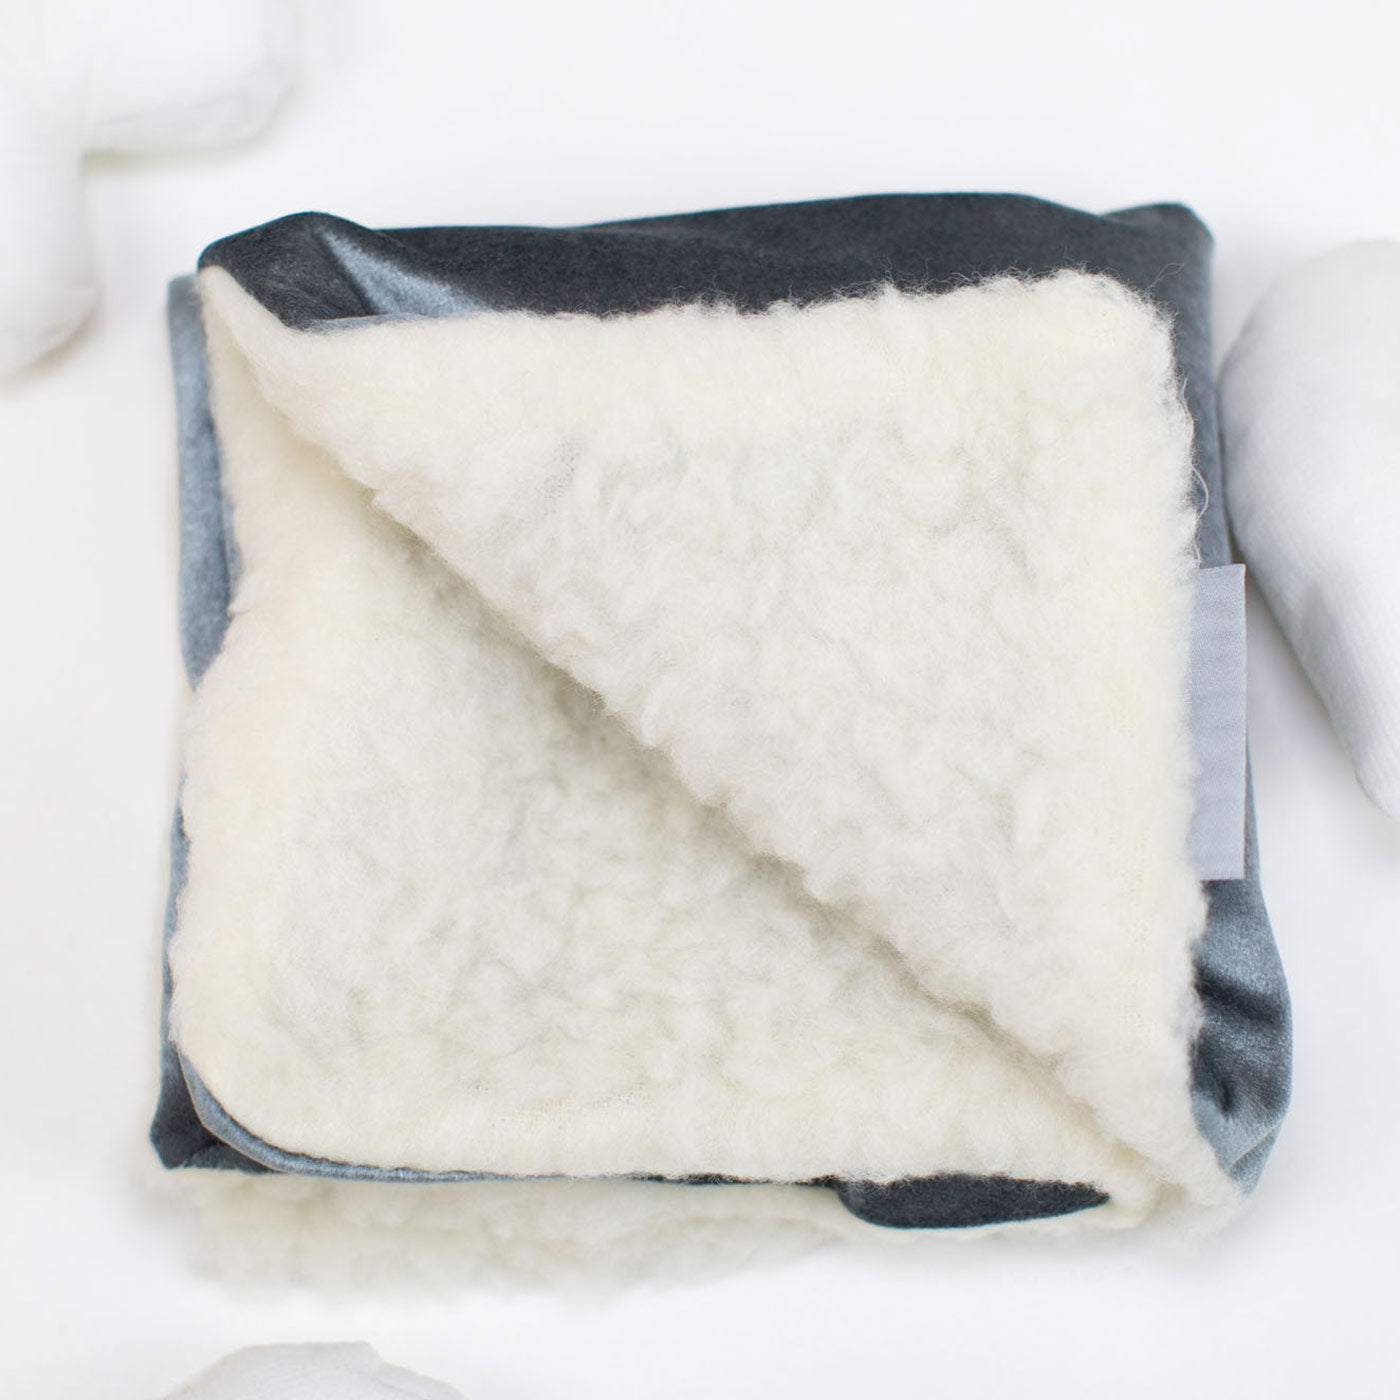  Super Soft Sherpa & Teddy Fleece Lining, Our Luxury Cat & Kitten Blanket In Stunning Elephant Velvet I The Perfect Cat Bed Accessory! Available Now at Lords & Labradors